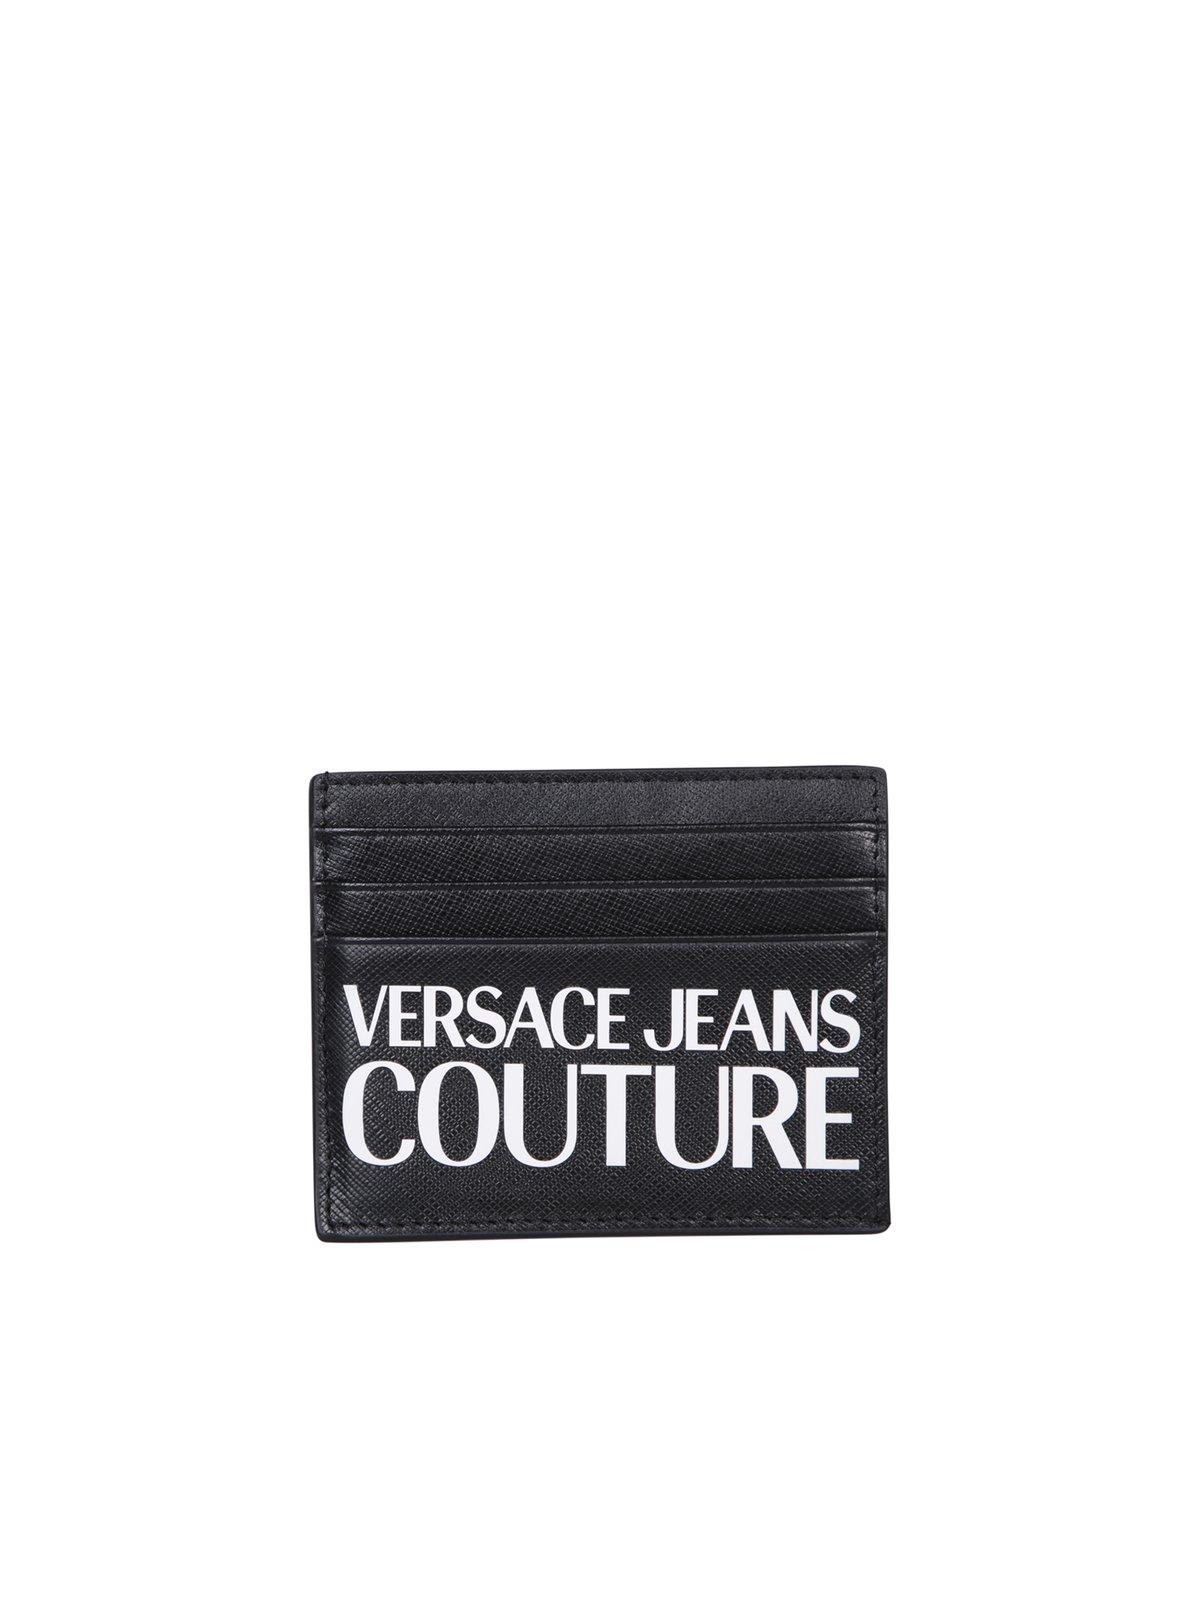 VERSACE JEANS COUTURE LOGO PRINTED CARDHOLDER